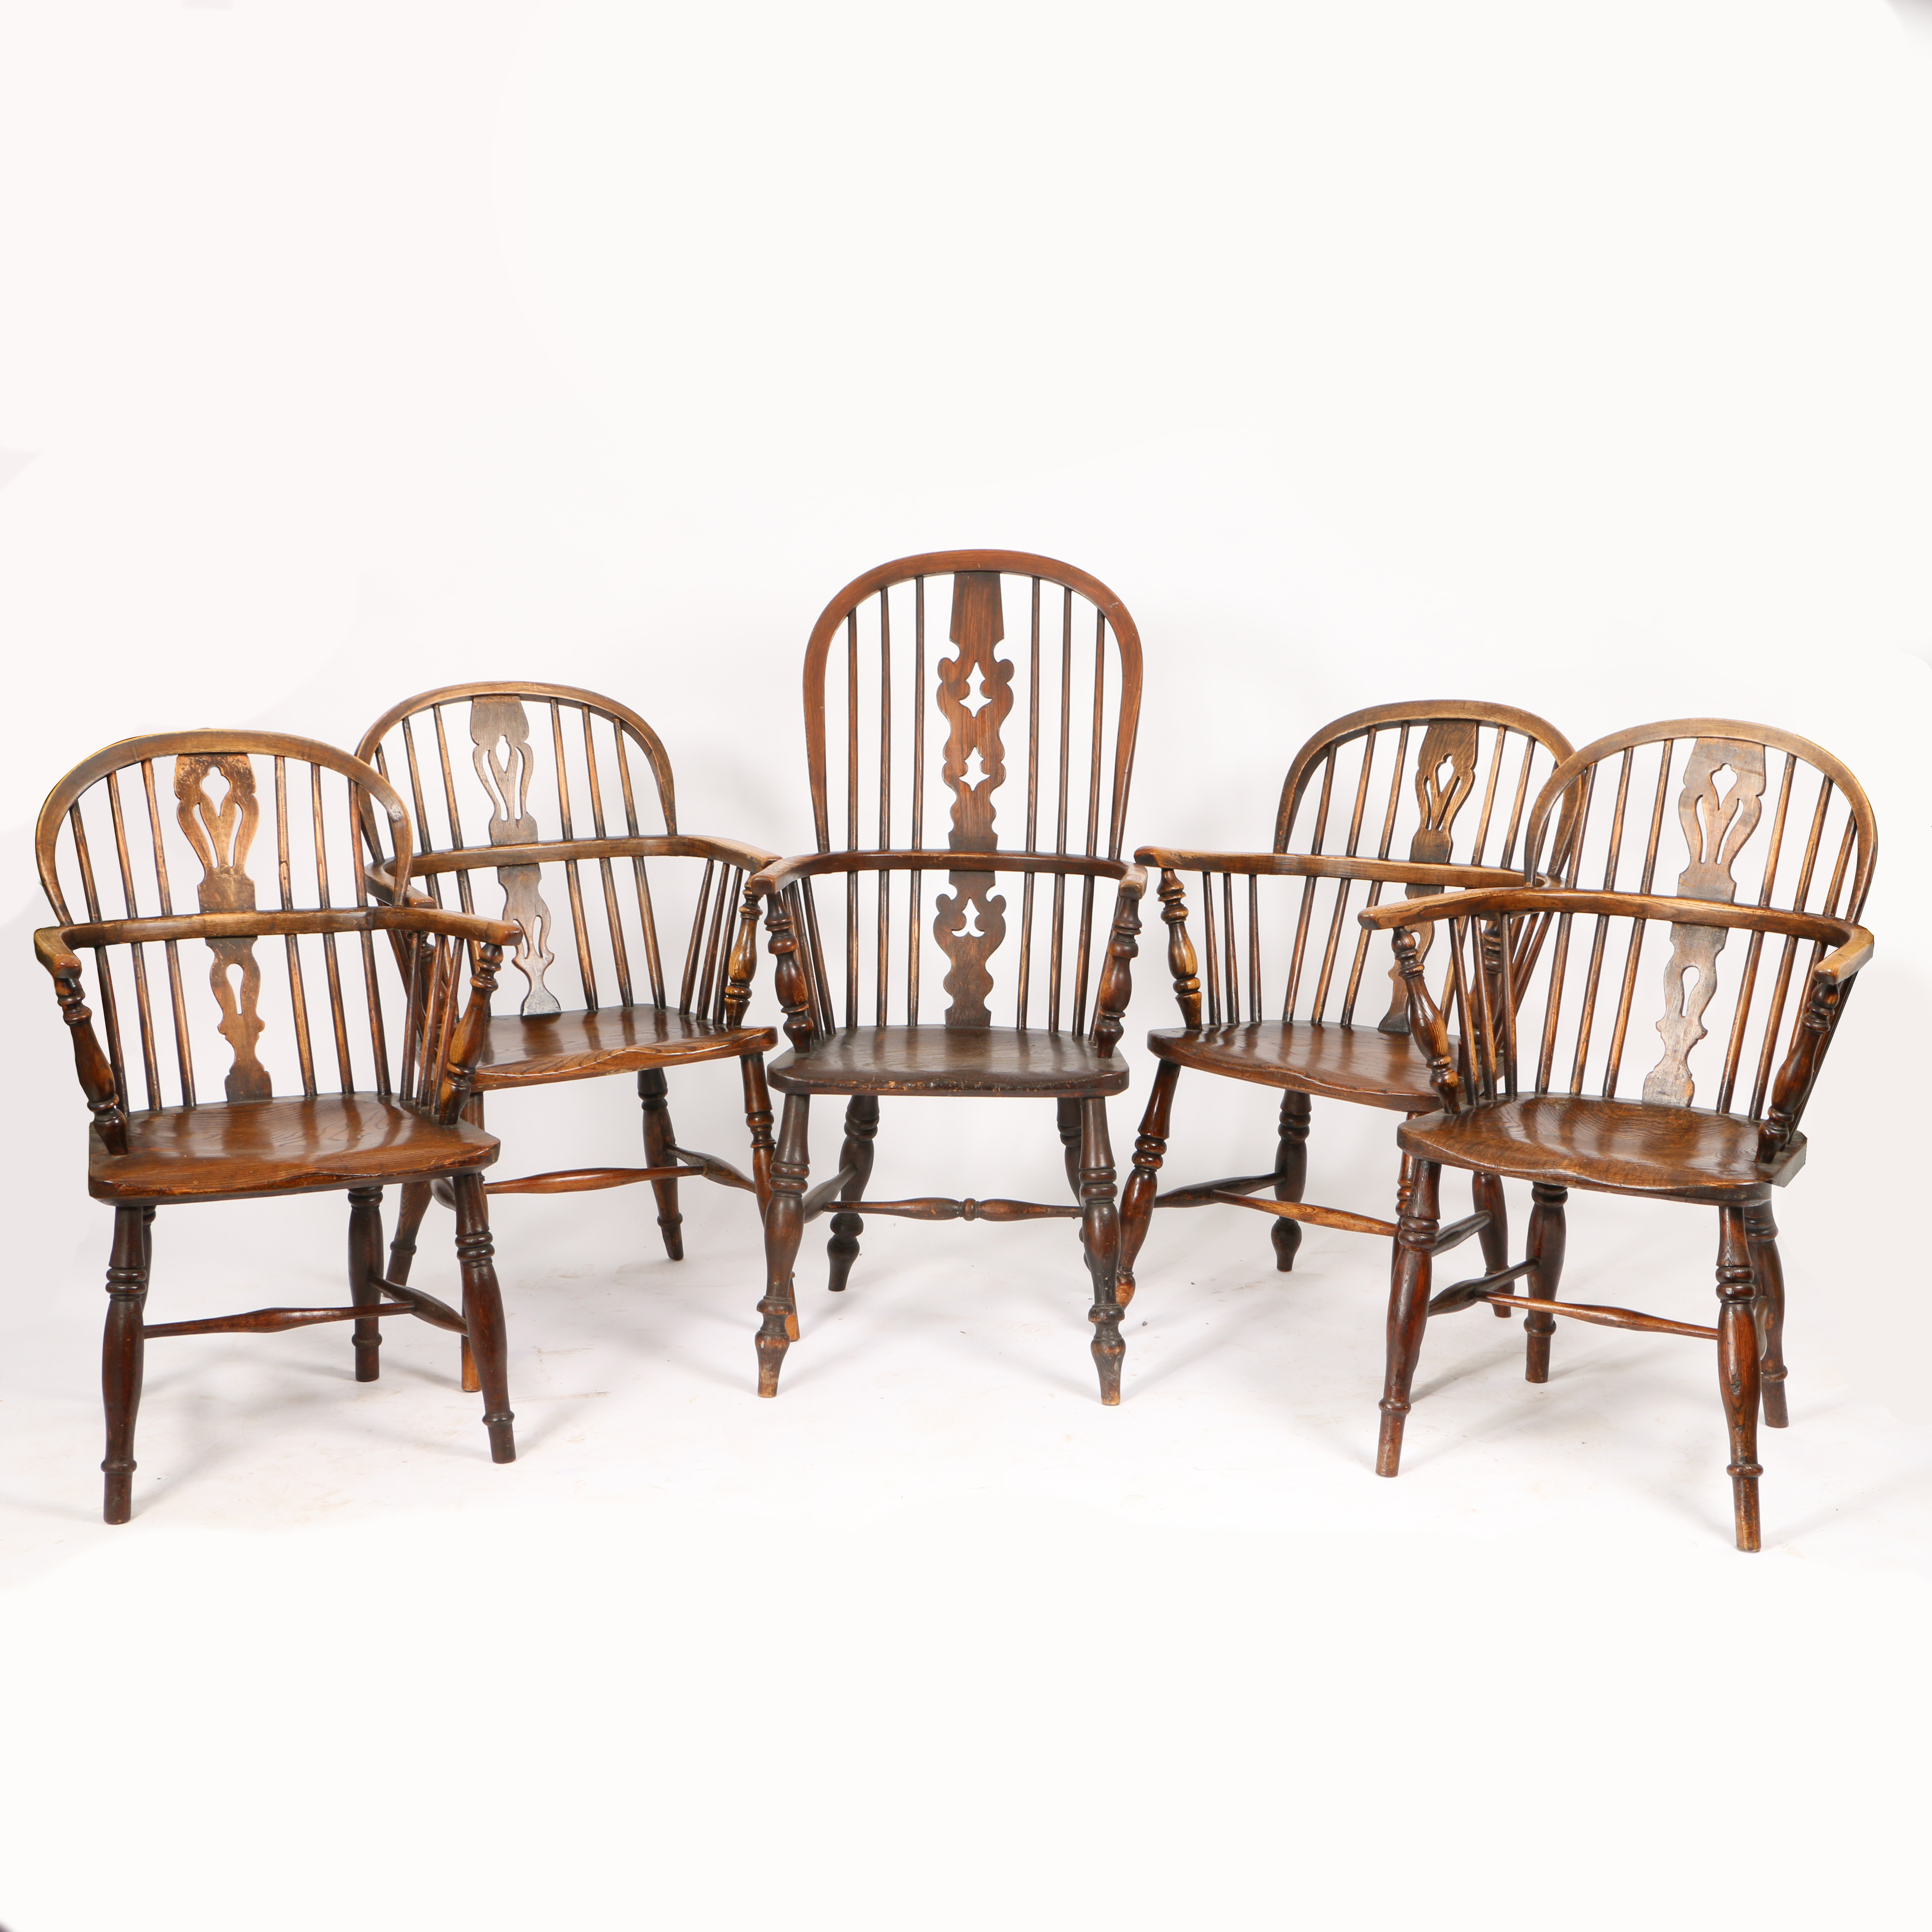 A SET OF FIVE OAK AND ELM WINDSOR ARMCHAIRS.